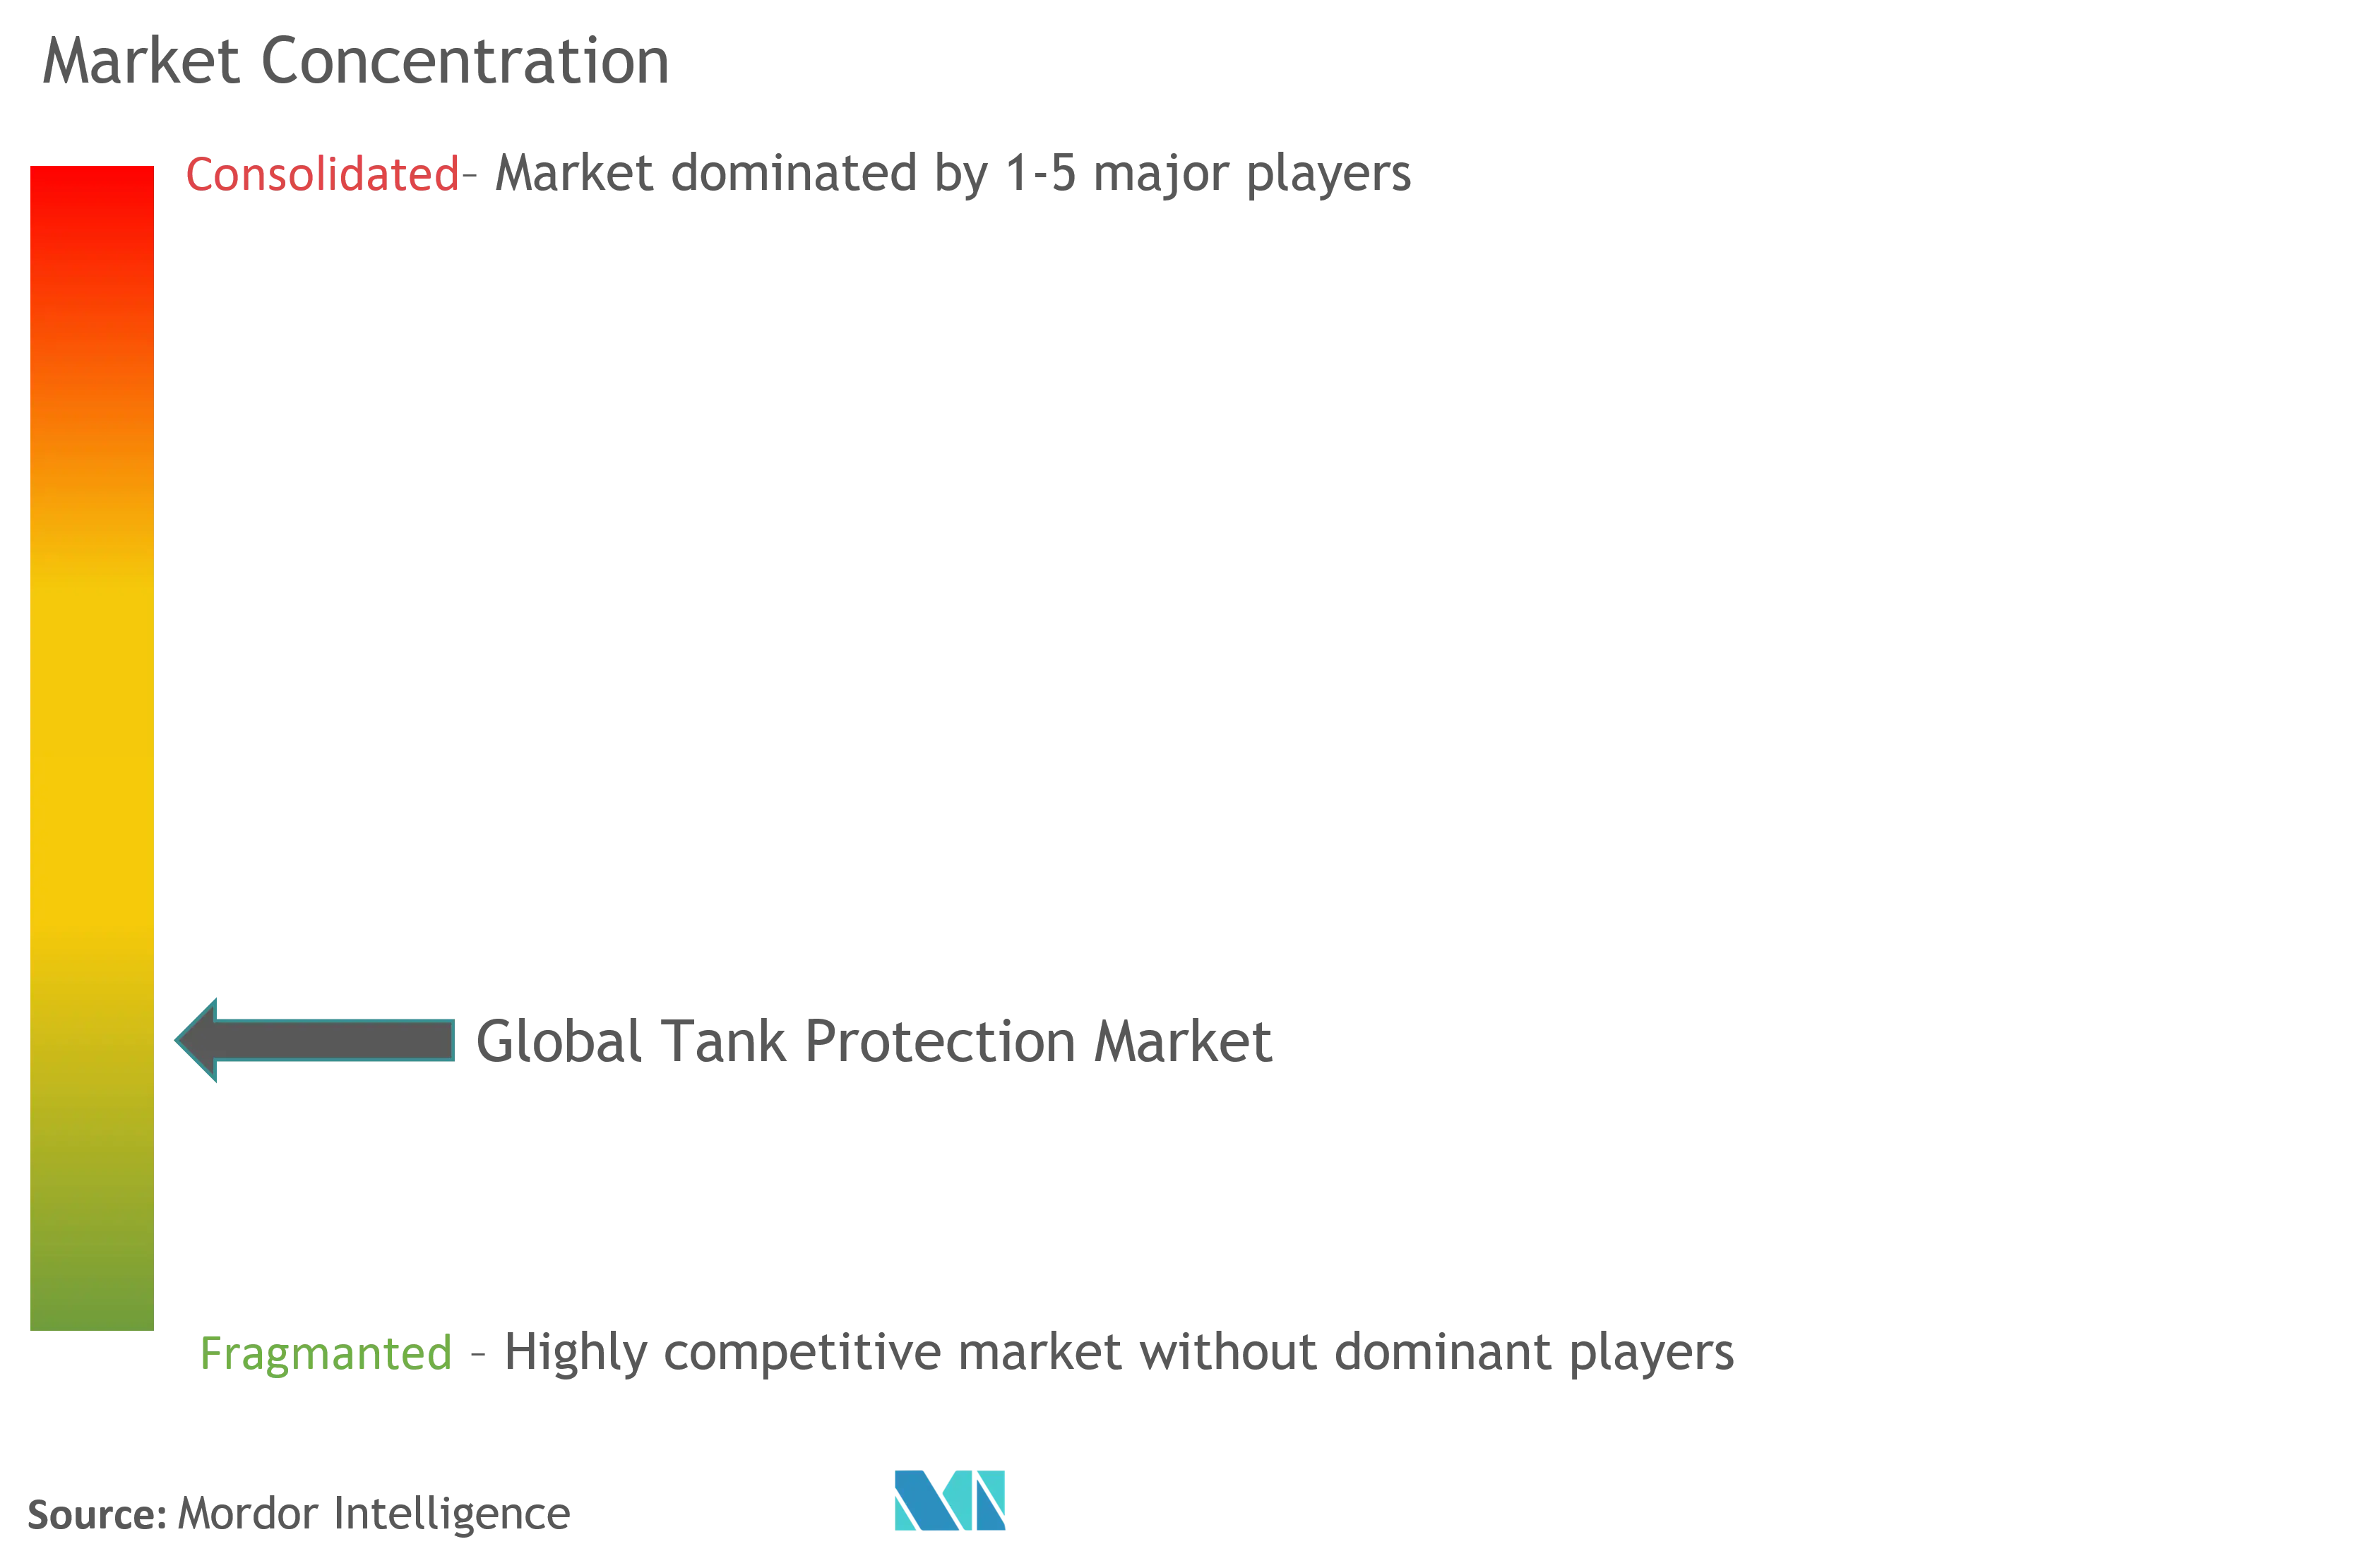 Tank Protection Market Concentration